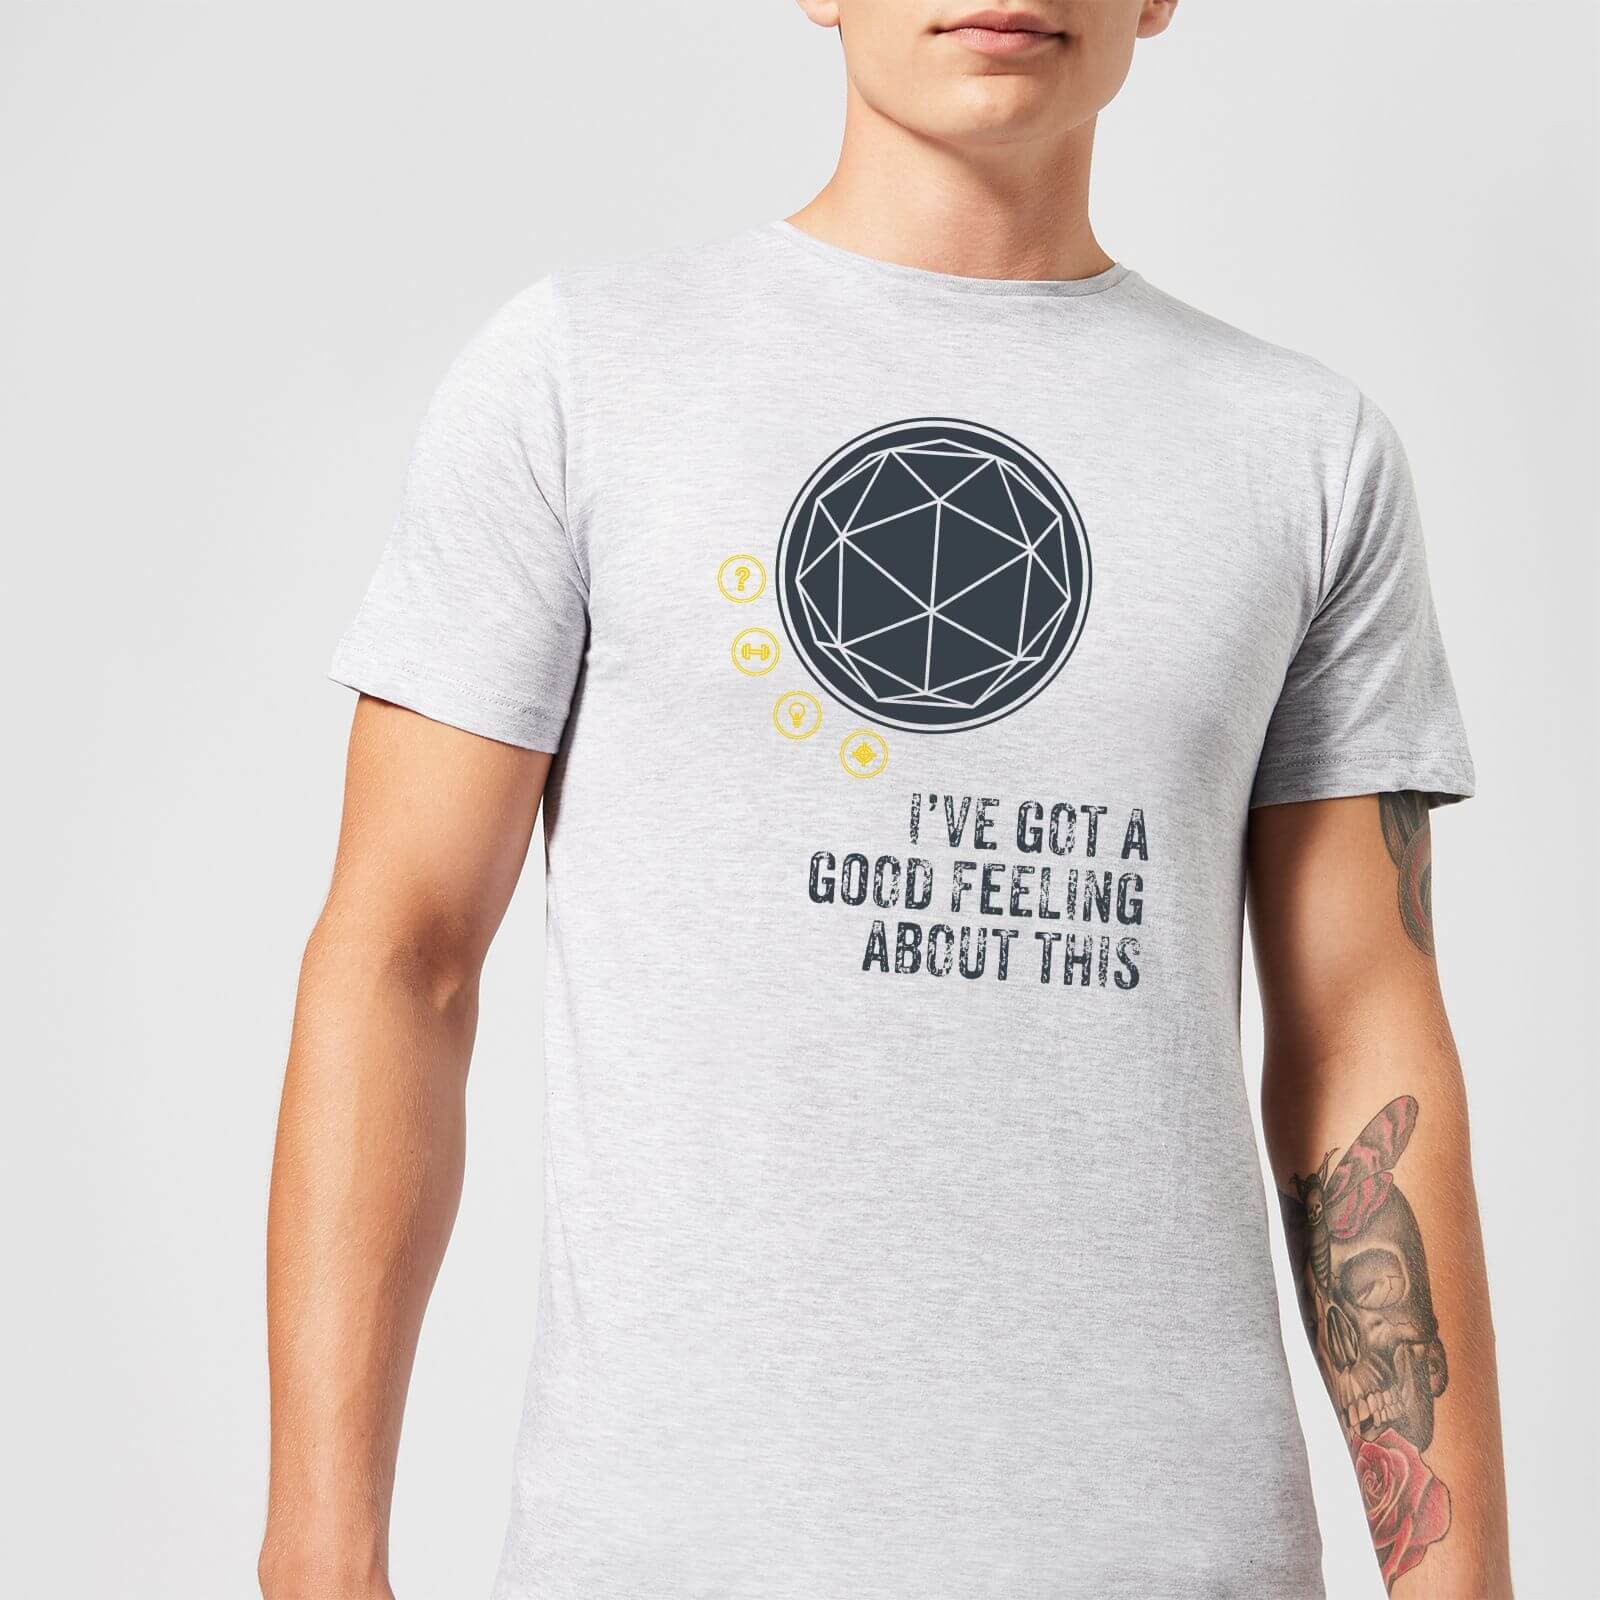 Crystal Maze I've Got A Good Feeling About This- Industrial Men's T-Shirt - Grey - S - Grey